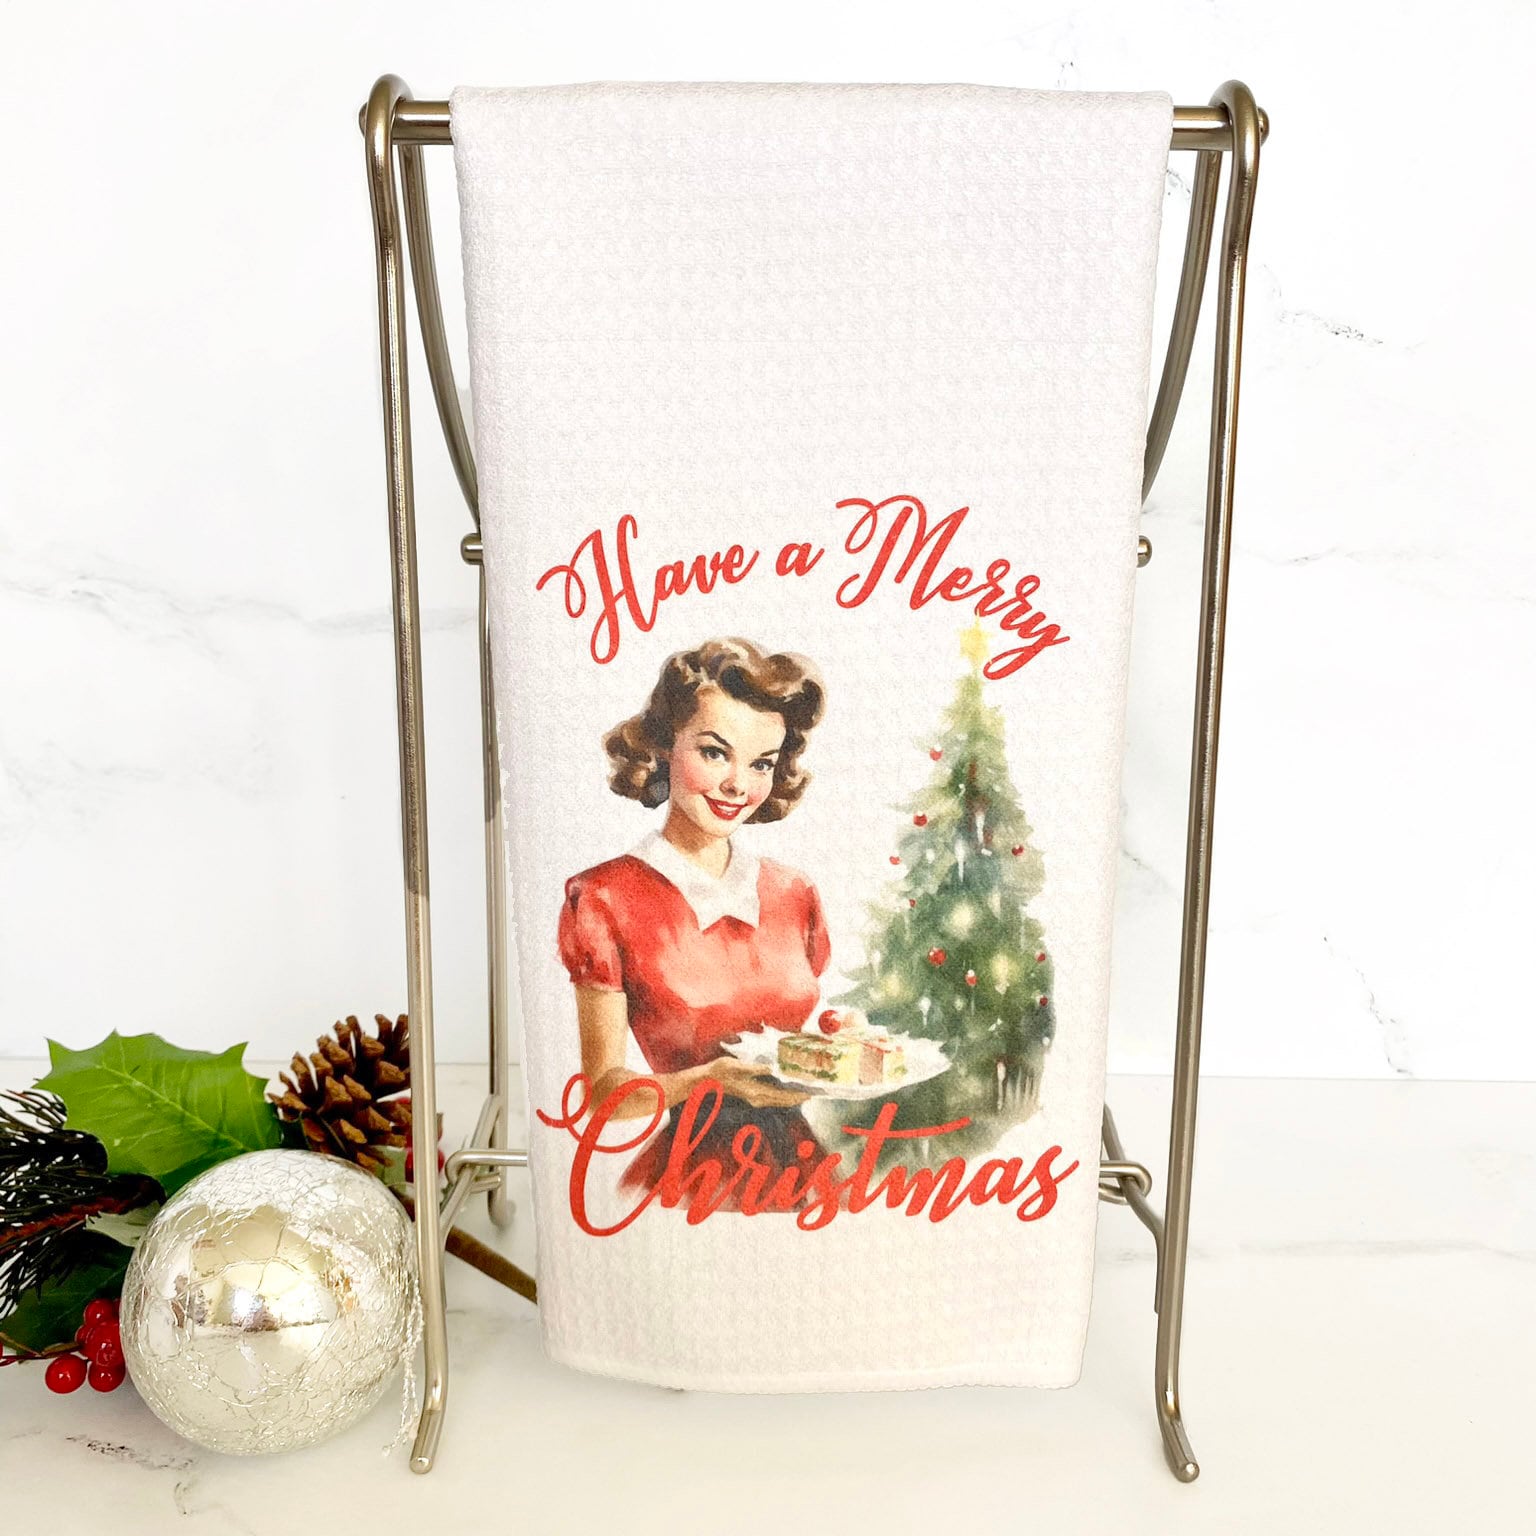 Have a Merry Christmas dishtowel with a red cursive font and a watercolor image of a woman holding baked goods with a Christmas Tree in the background.